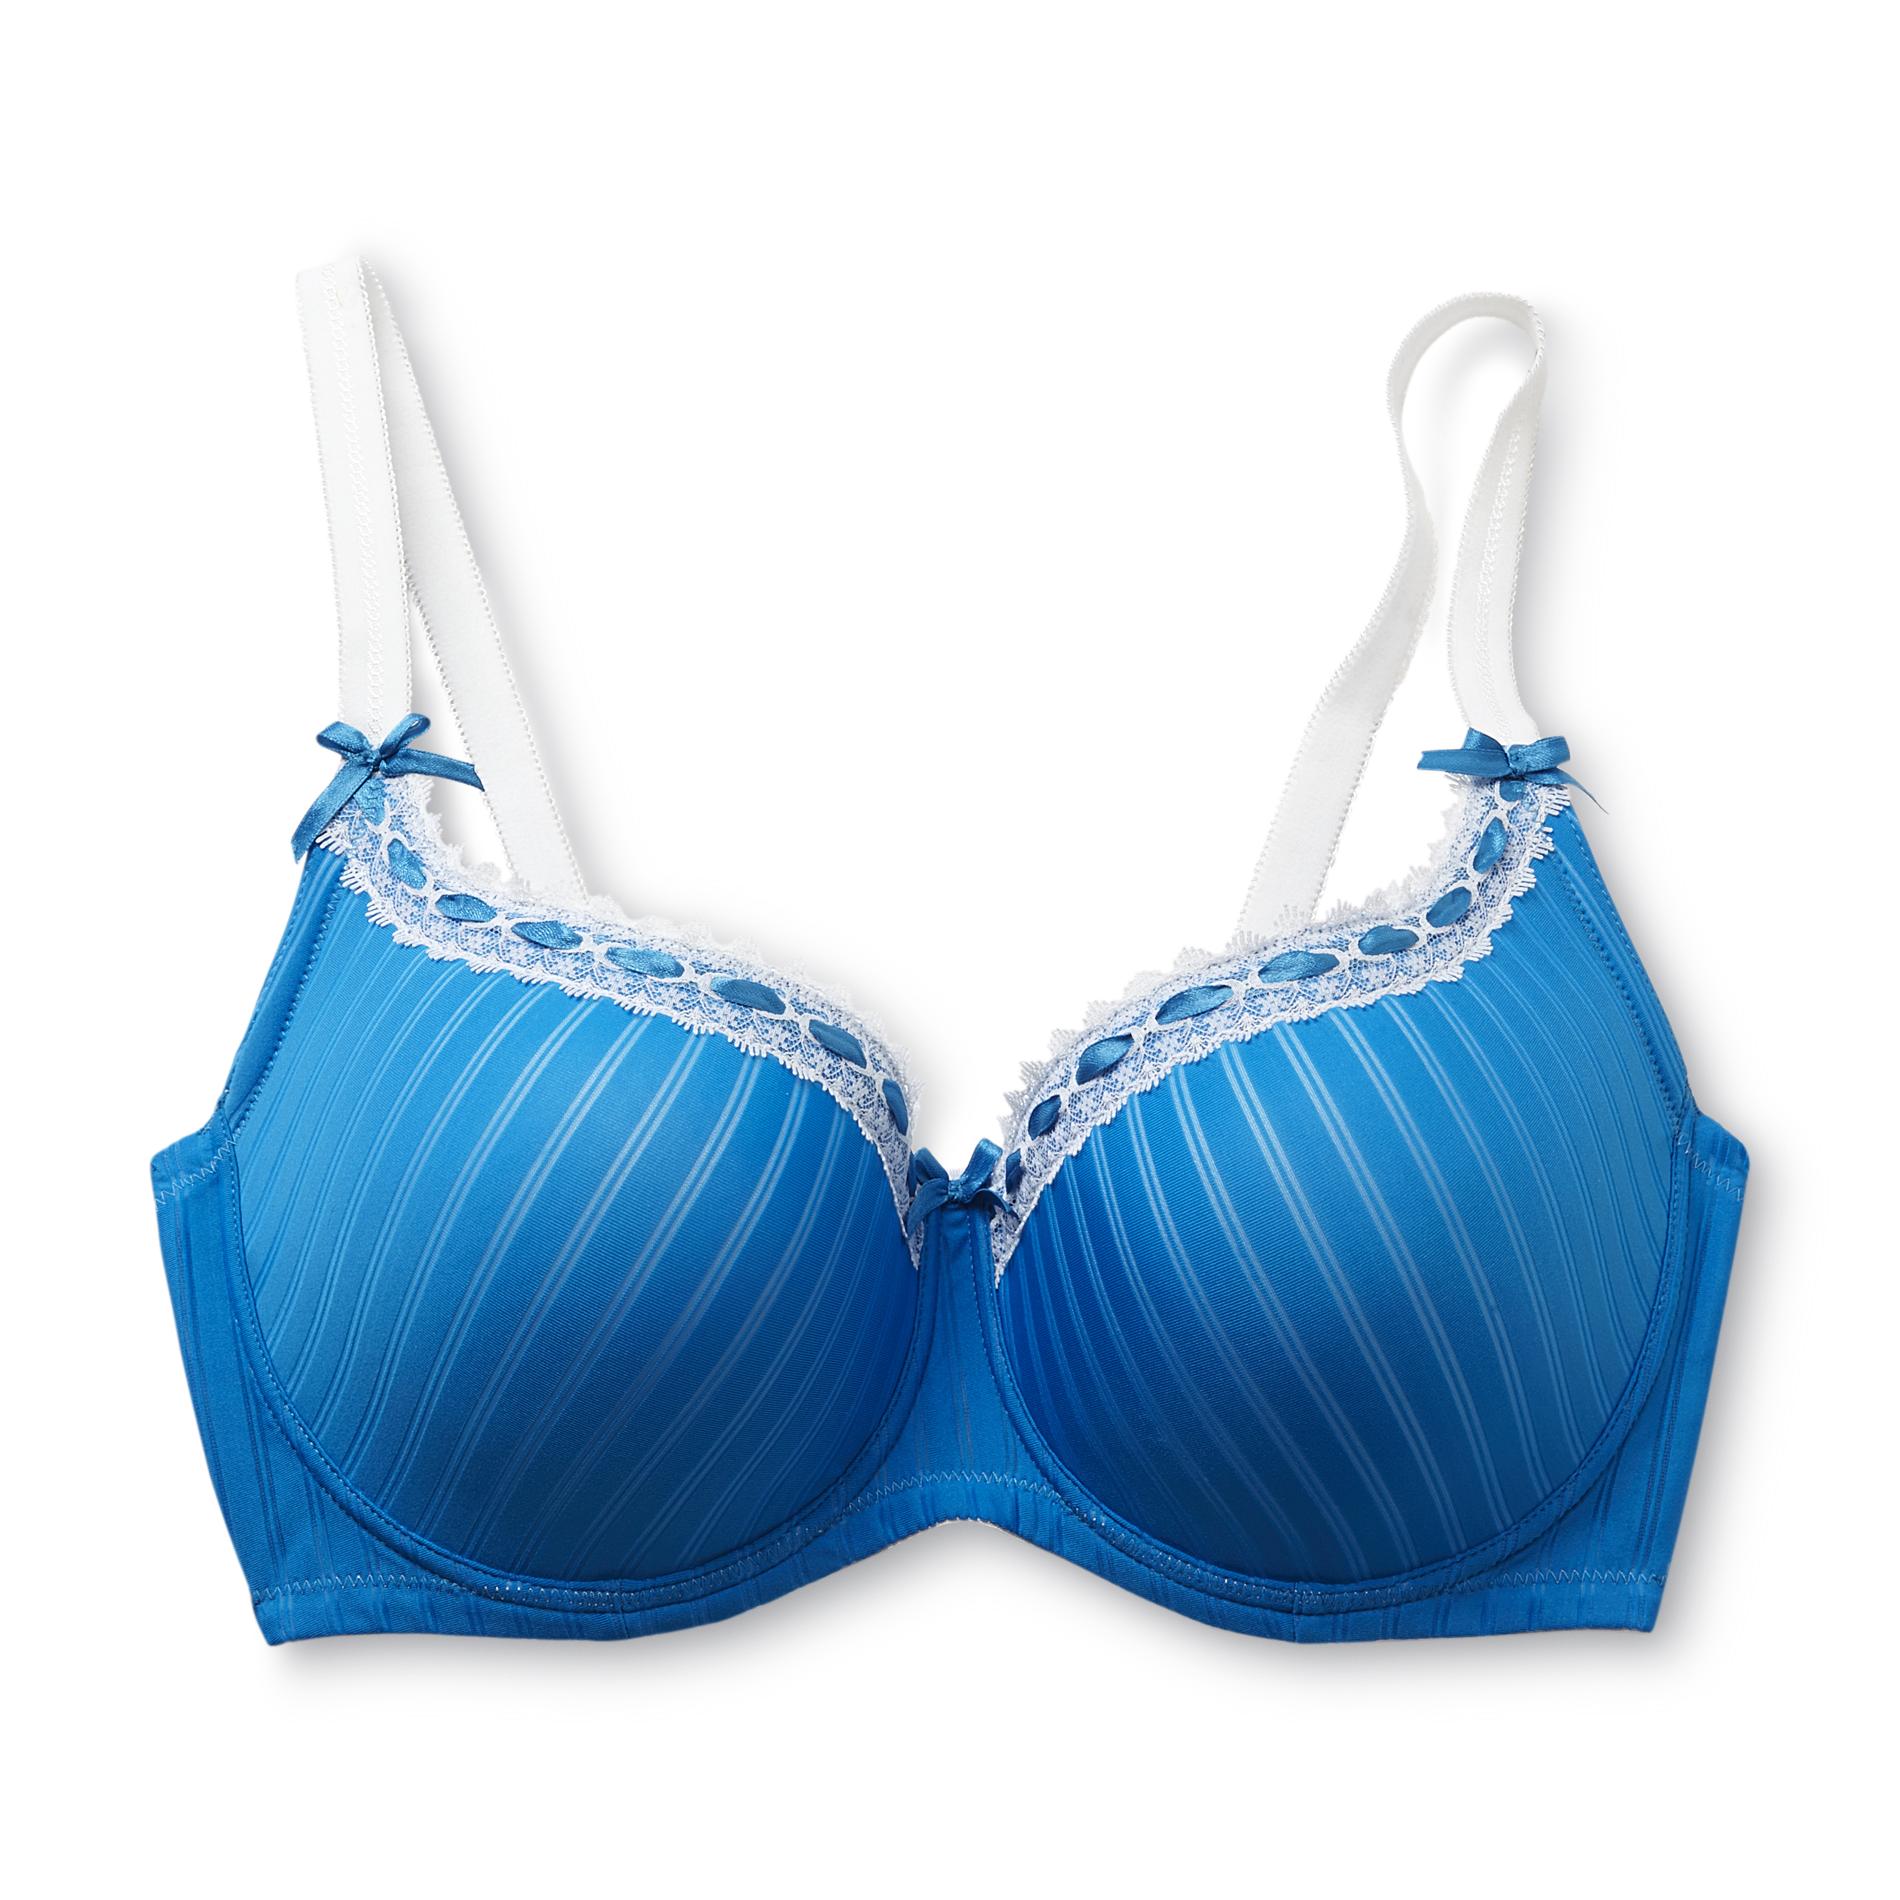 Stop Wasting Money and Finally Find a Bra That Fits!